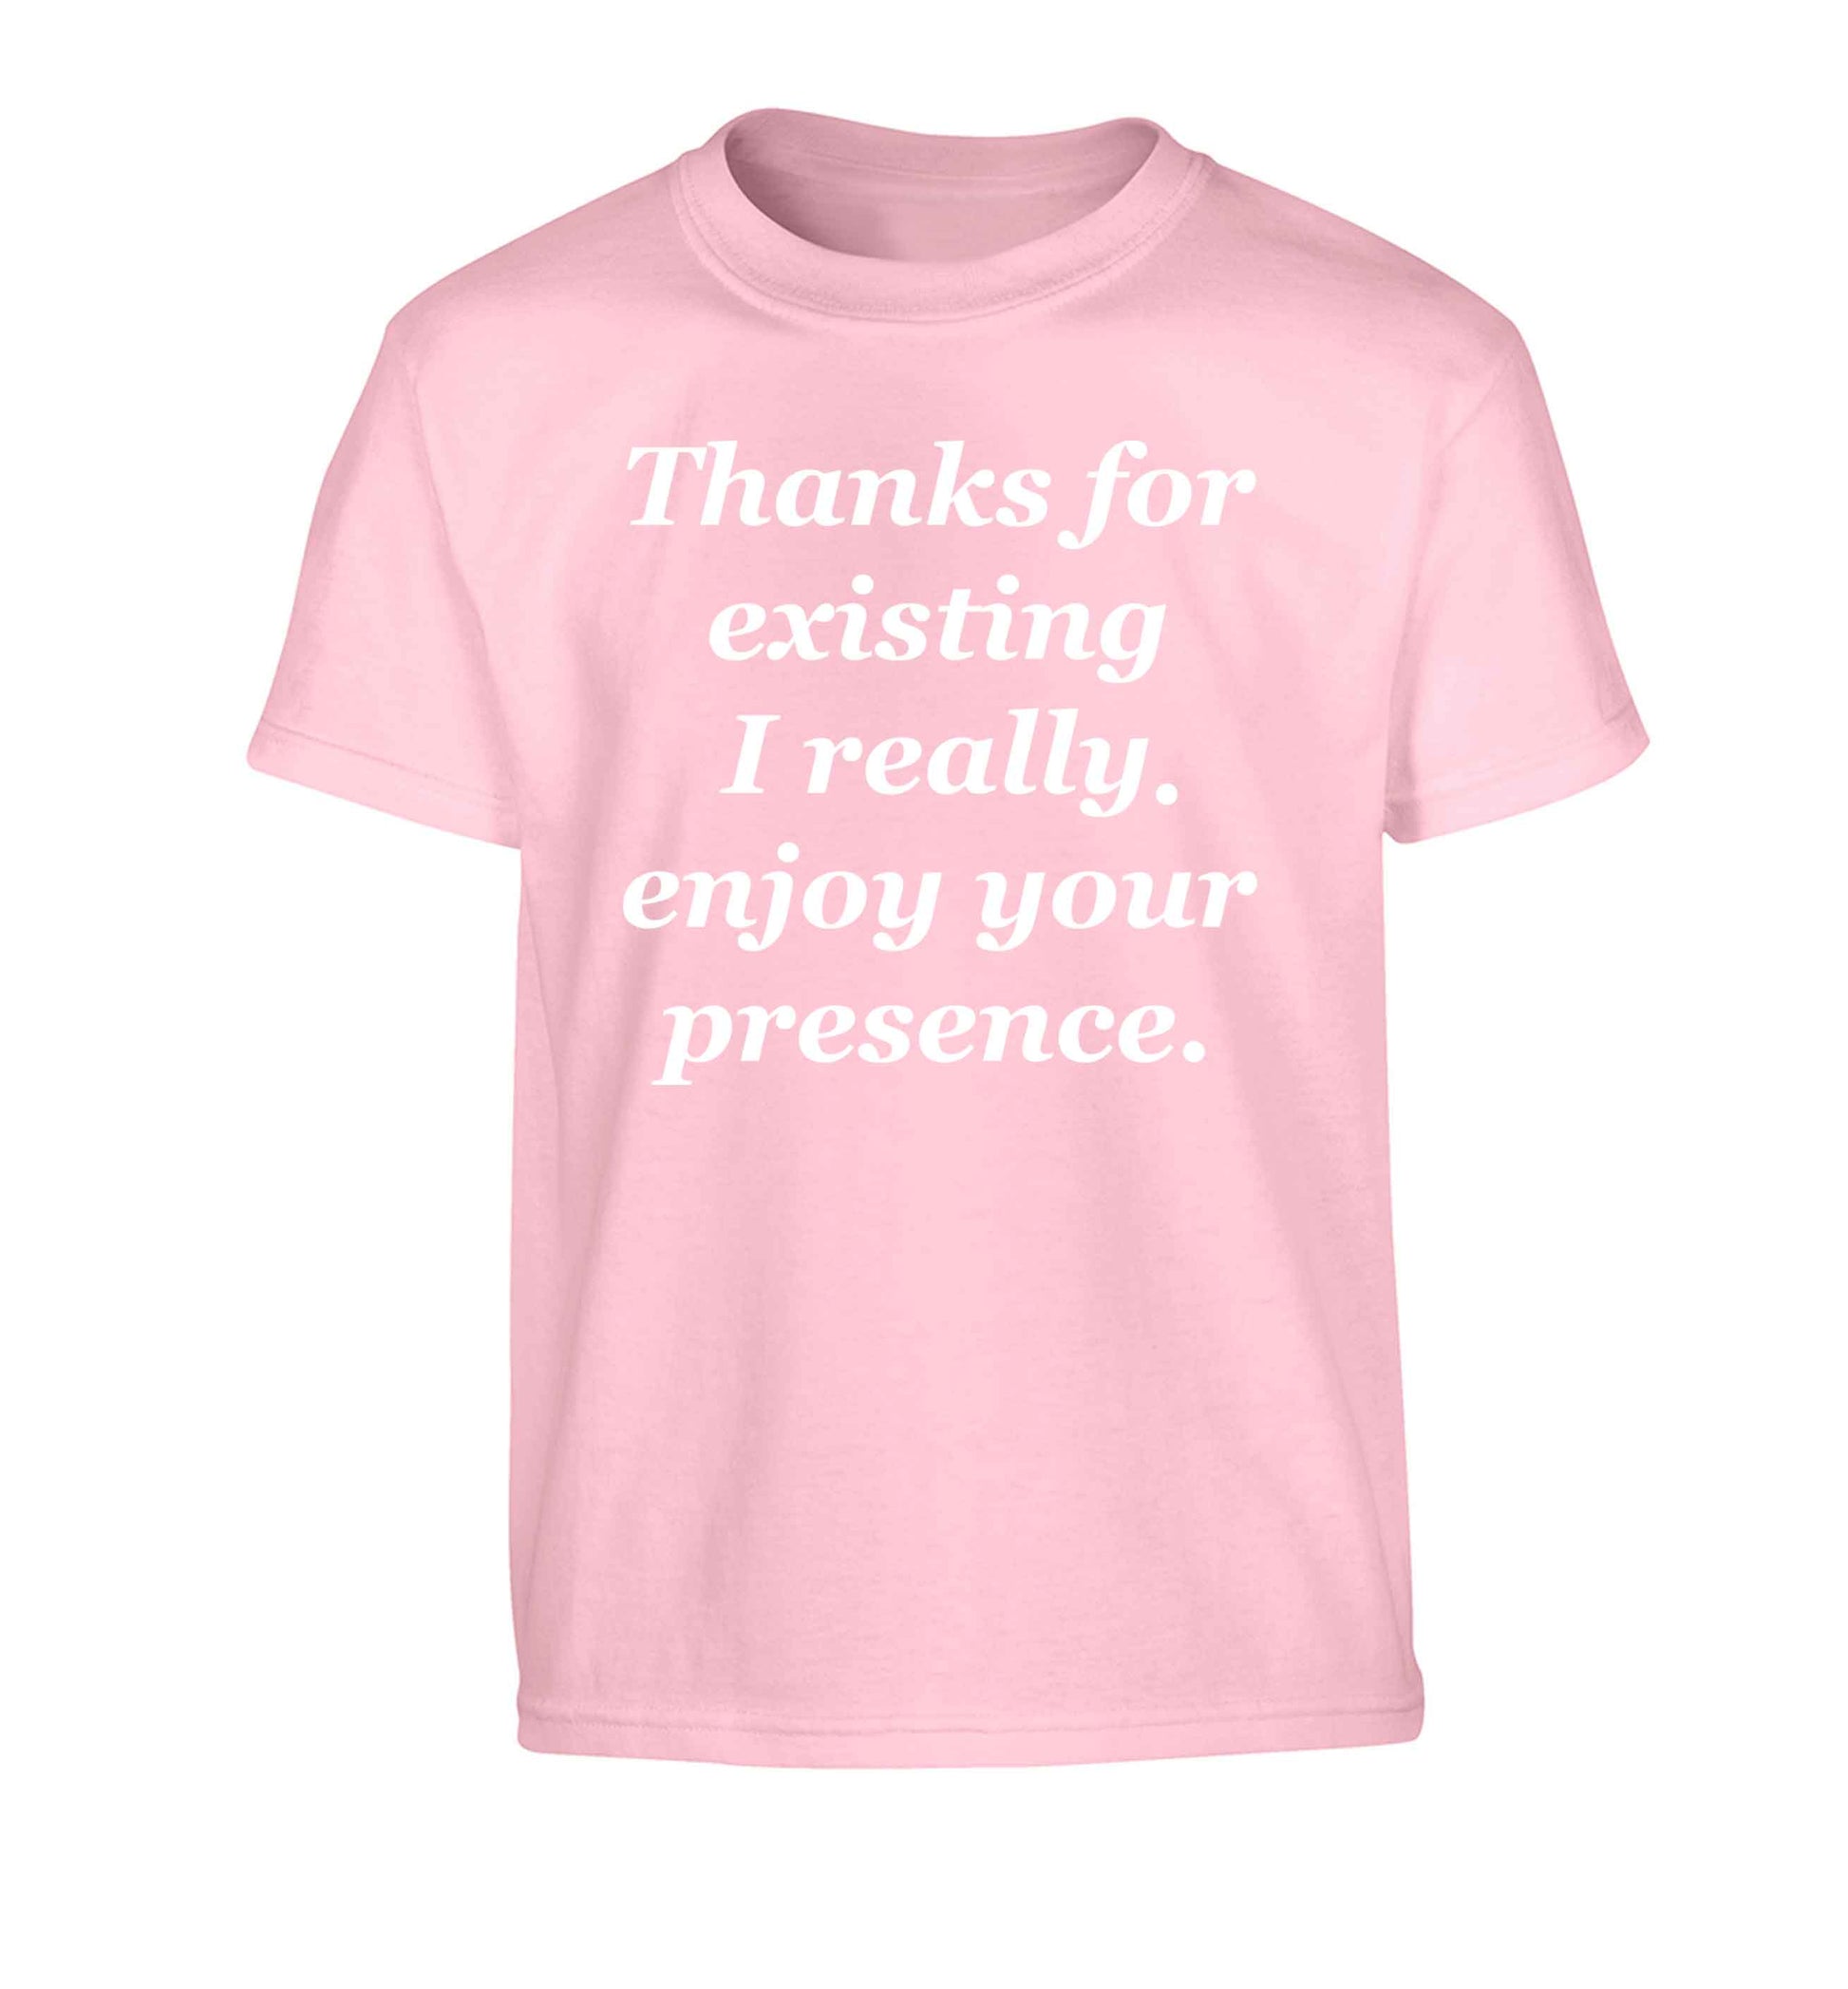 Thanks for existing I really enjoy your presence Children's light pink Tshirt 12-13 Years